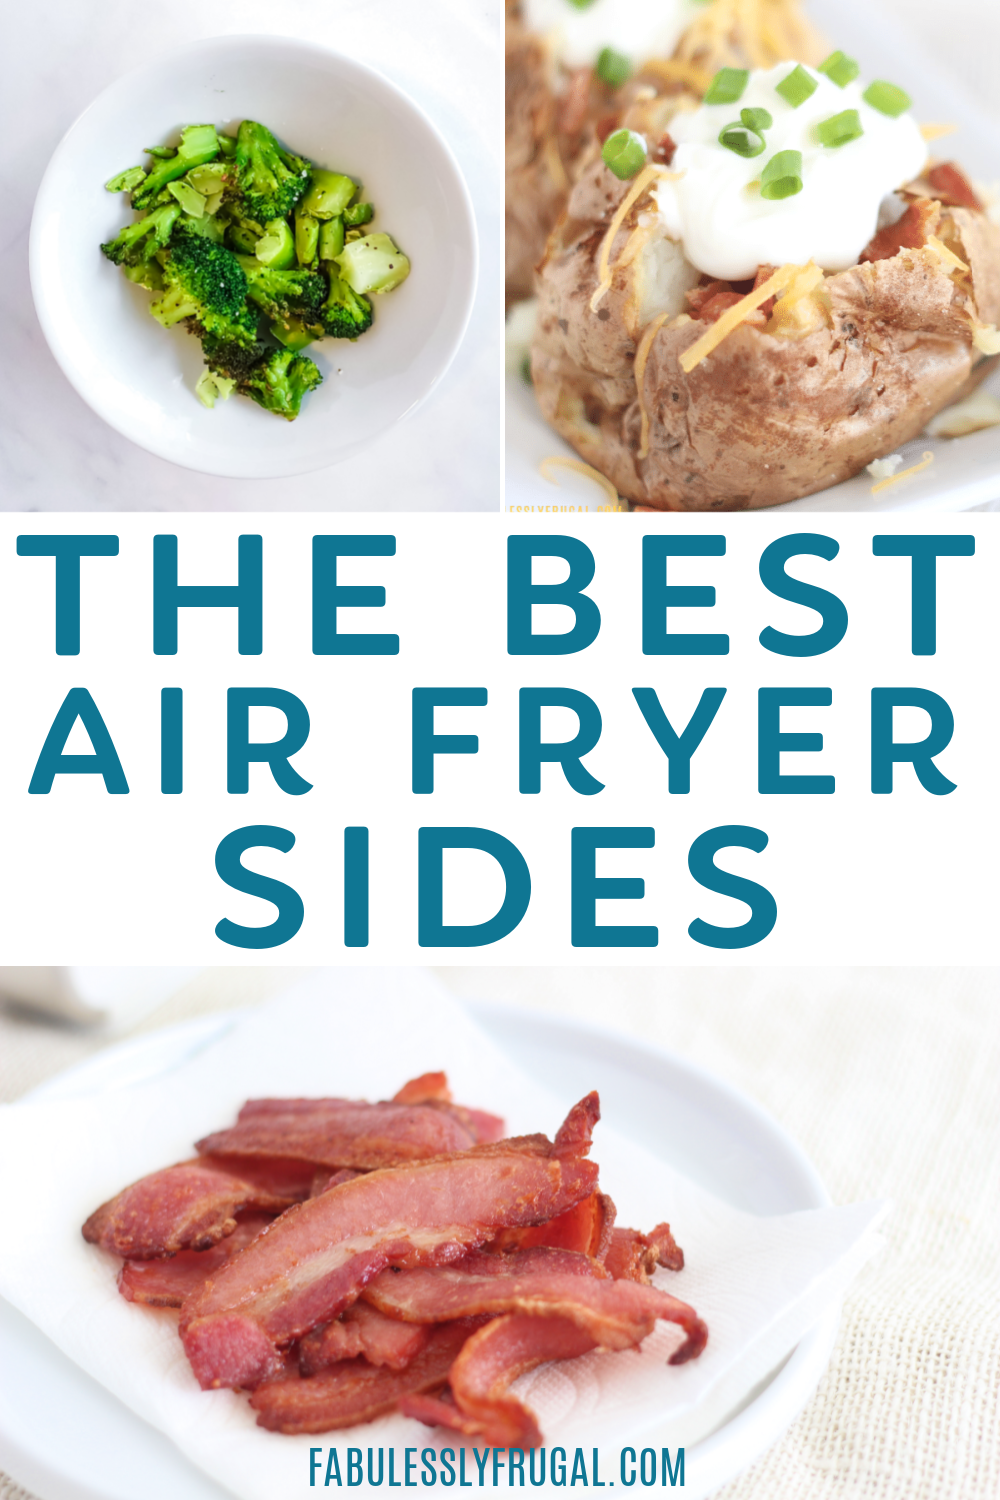 Easy Air Fryer Meals For Kids You Can Make Tonight  Air fryer dinner  recipes, Air fryer recipes healthy, Air fryer recipes easy